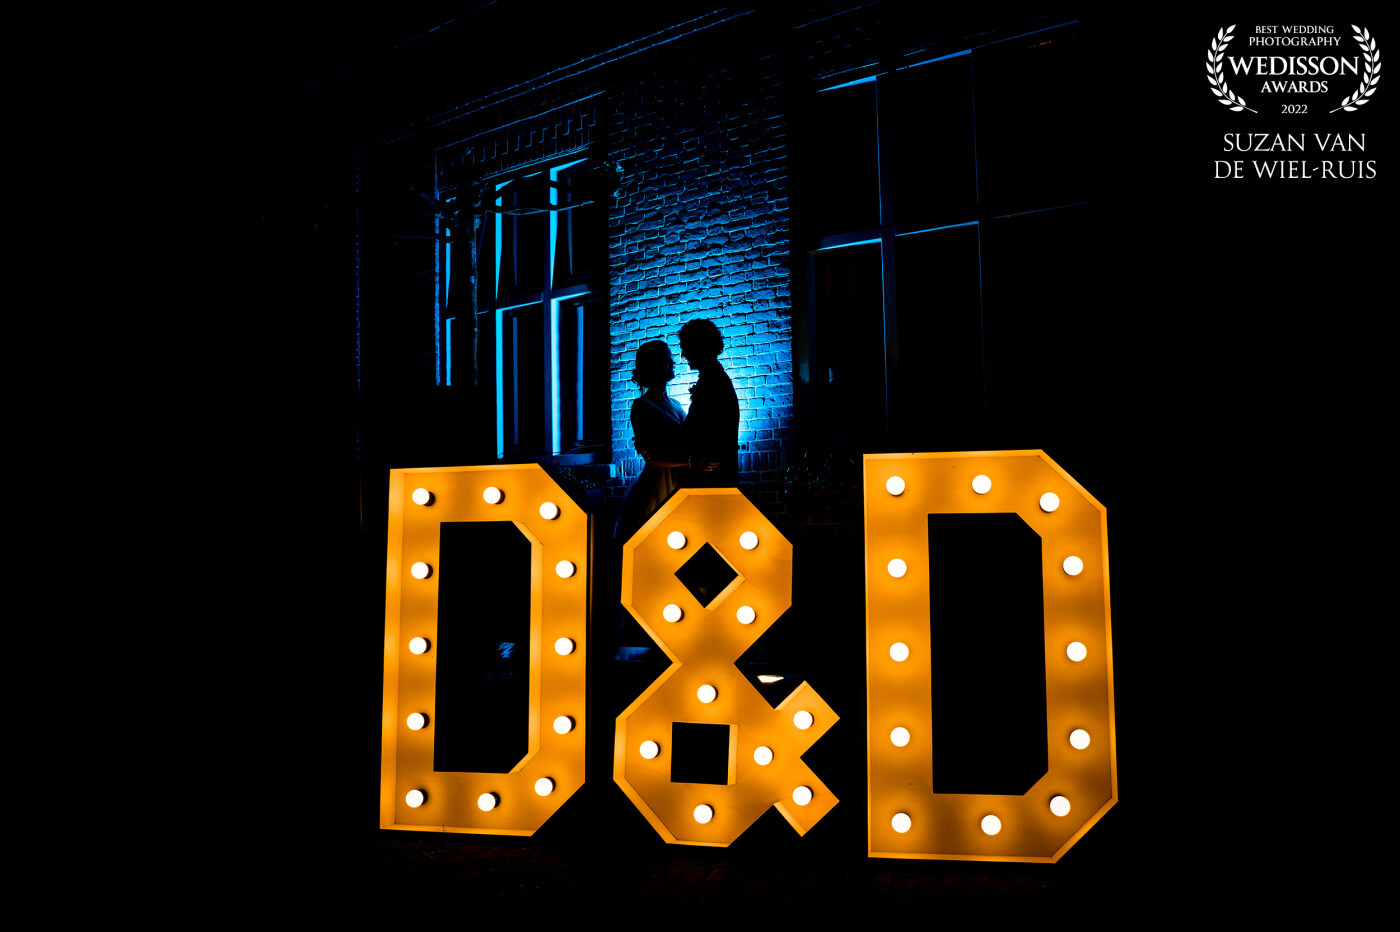 At the wedding of Dion & Dionne we wanted to showcase that our couple had the same initials. We used a blue gel to incorporate the theme color, making it just perfect for their last shot.